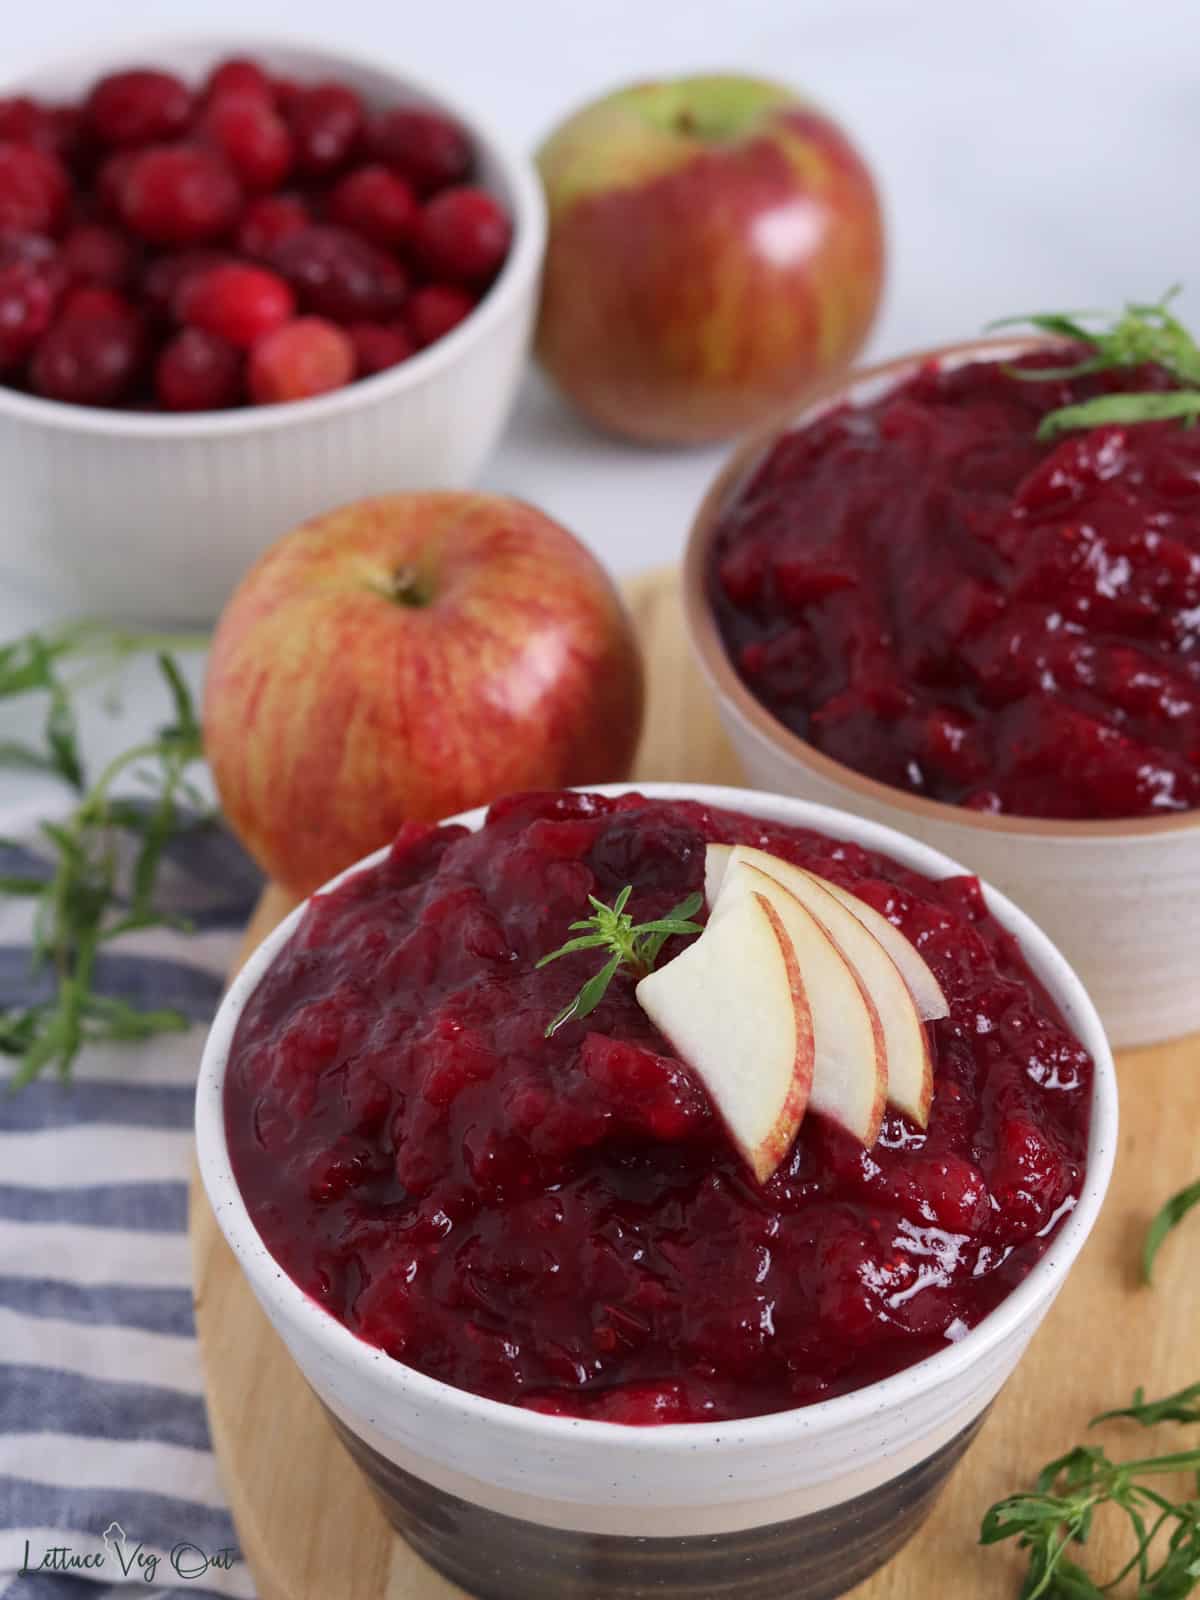 Two bowls of cranberry sauce on wood board with apple and herb garnish and bowl of whole cranberries in back.